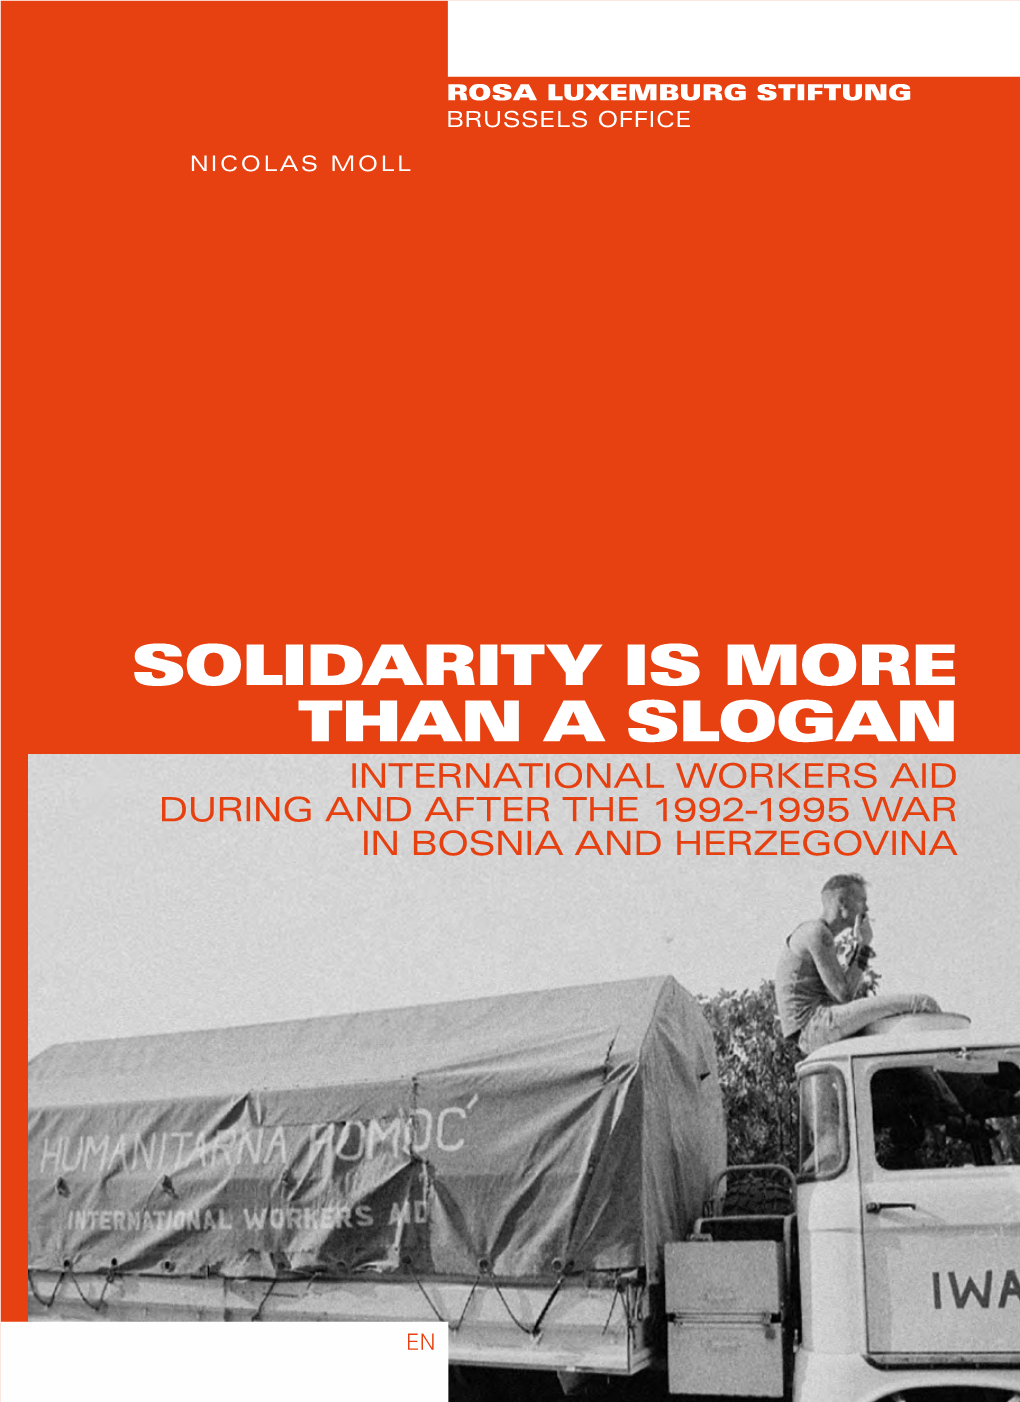 Solidarity Is More Than a Slogan International Workers Aid During and After the 1992-1995 War in Bosnia and Herzegovina